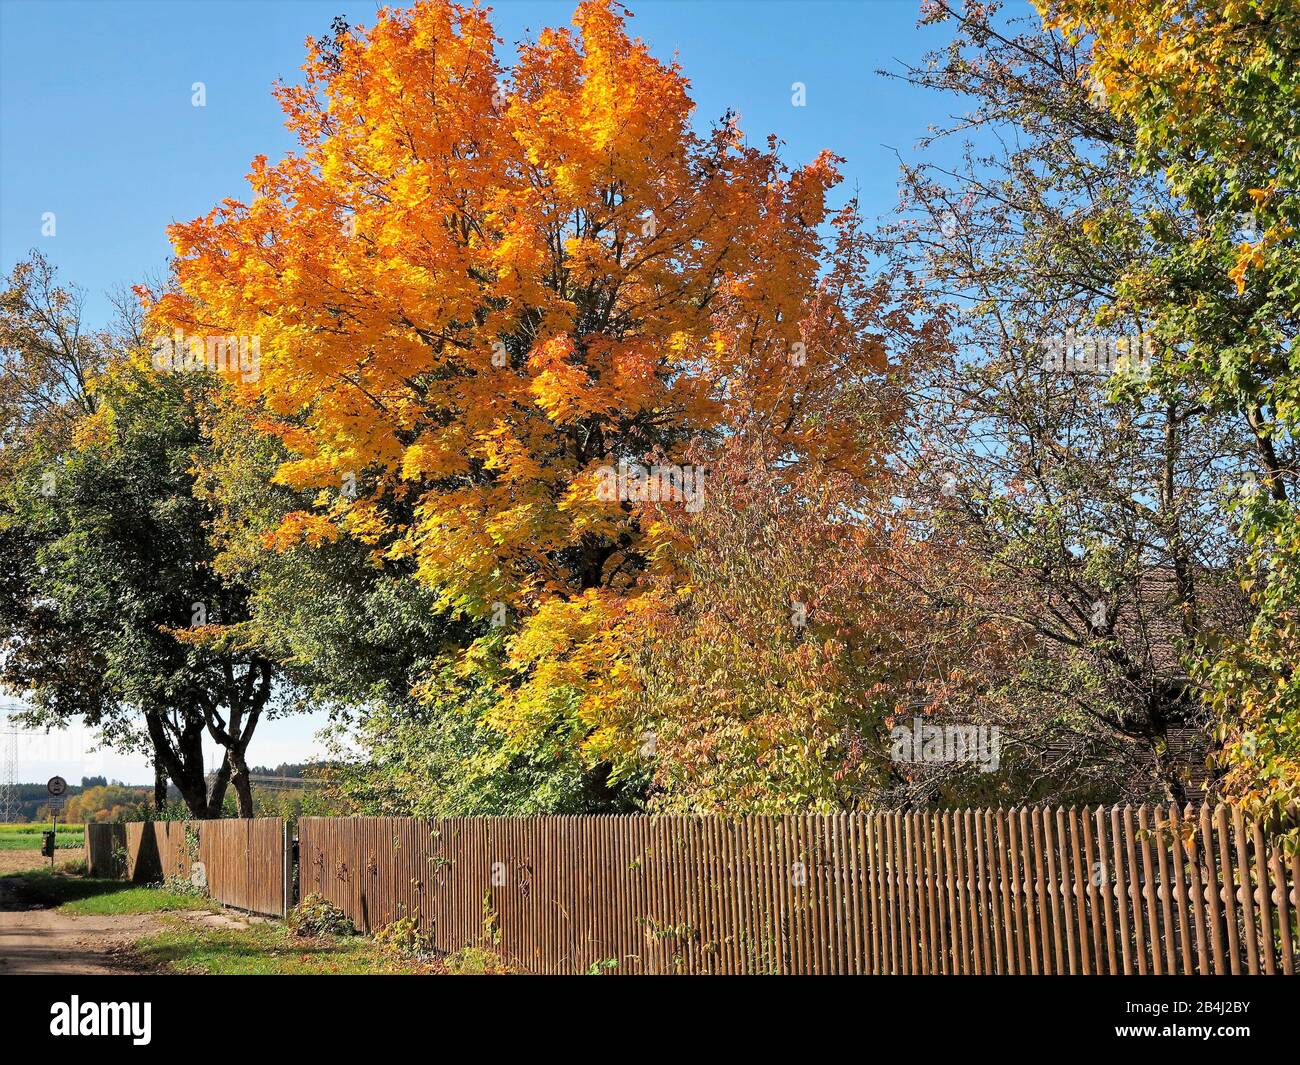 Germany, Bavaria, leaves coloring, maple tree, wooden fence Stock Photo